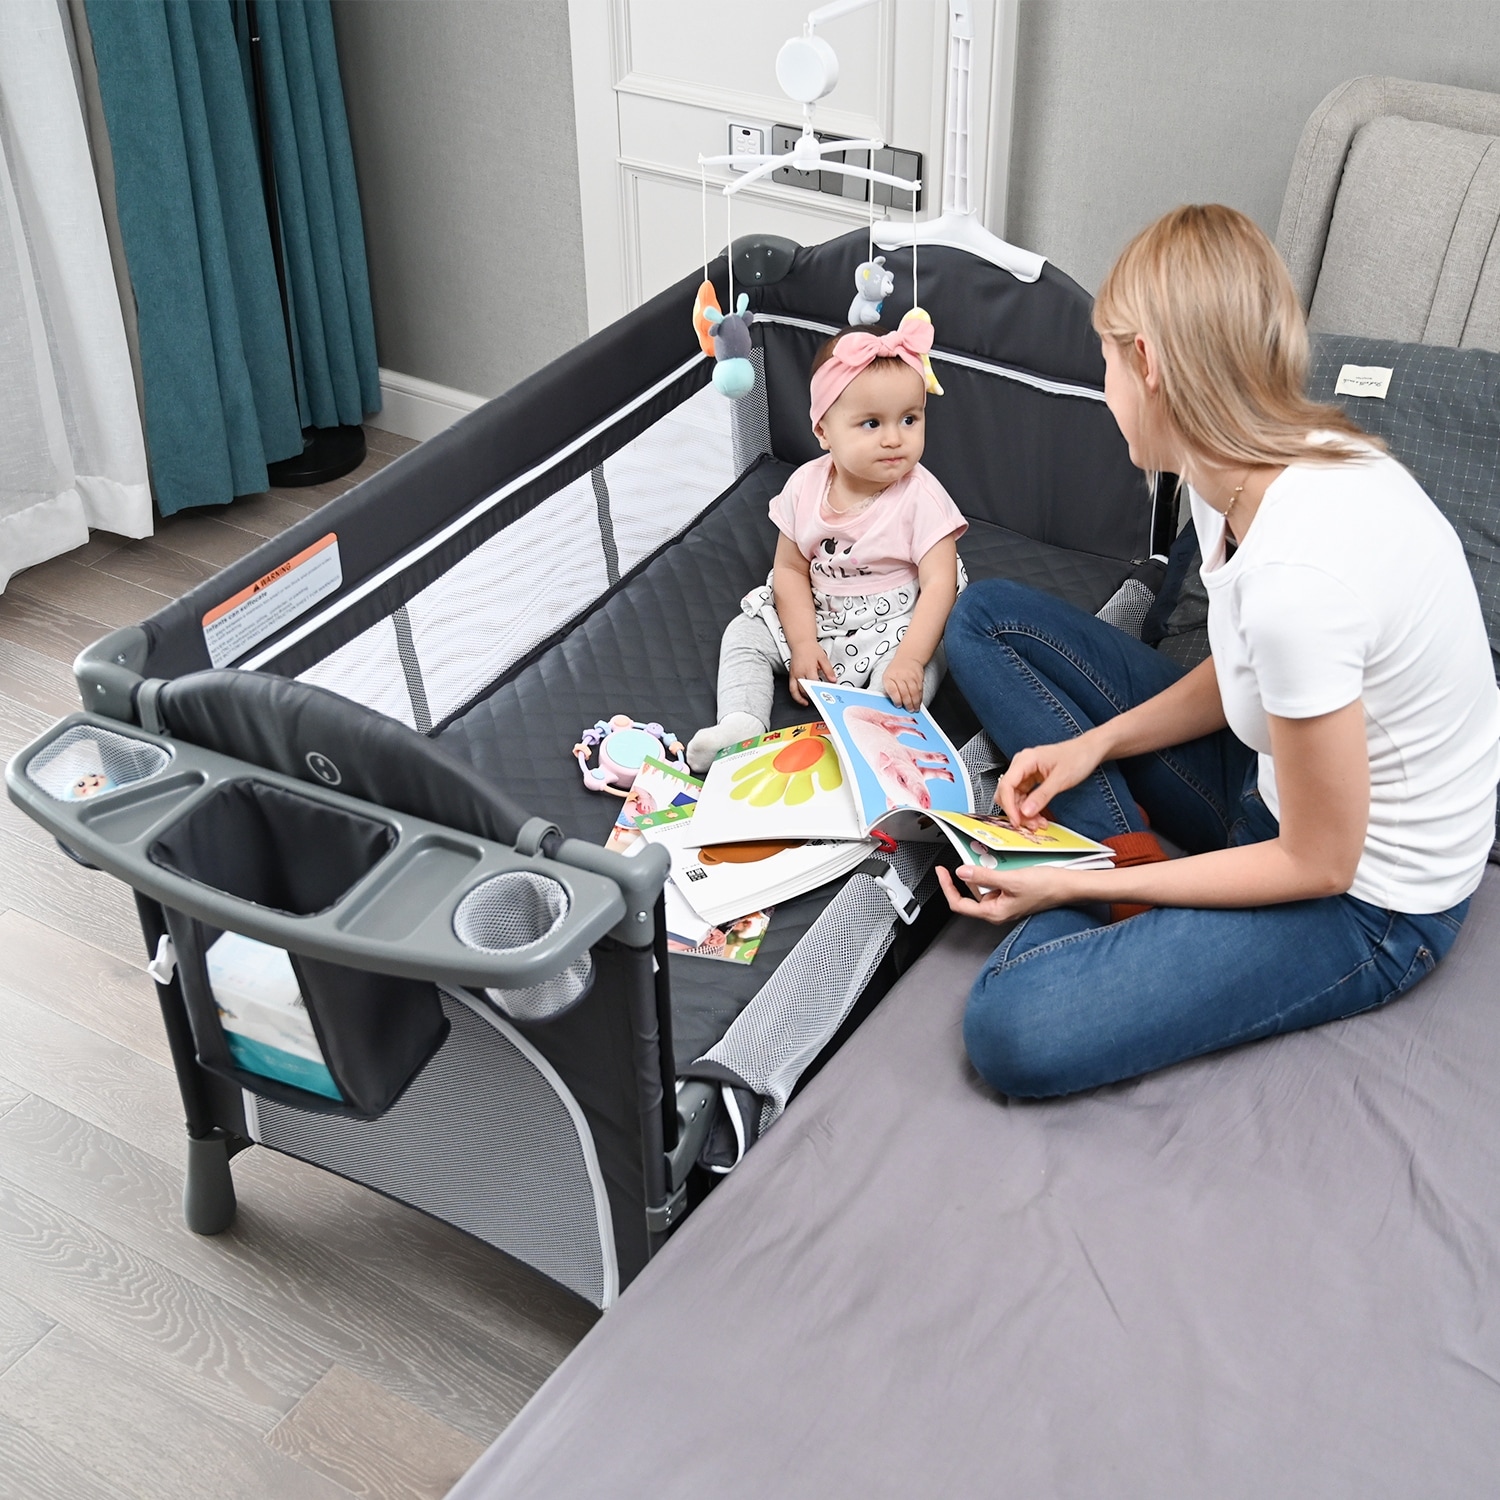 https://ak1.ostkcdn.com/images/products/is/images/direct/9b67fe1a8f355f0cf3e3a75e08ee80a1625c7e94/FAMAPY-Portable-3-in-1-Baby-Bassinet-Changing-Table-Playard%2C-Grey.jpg